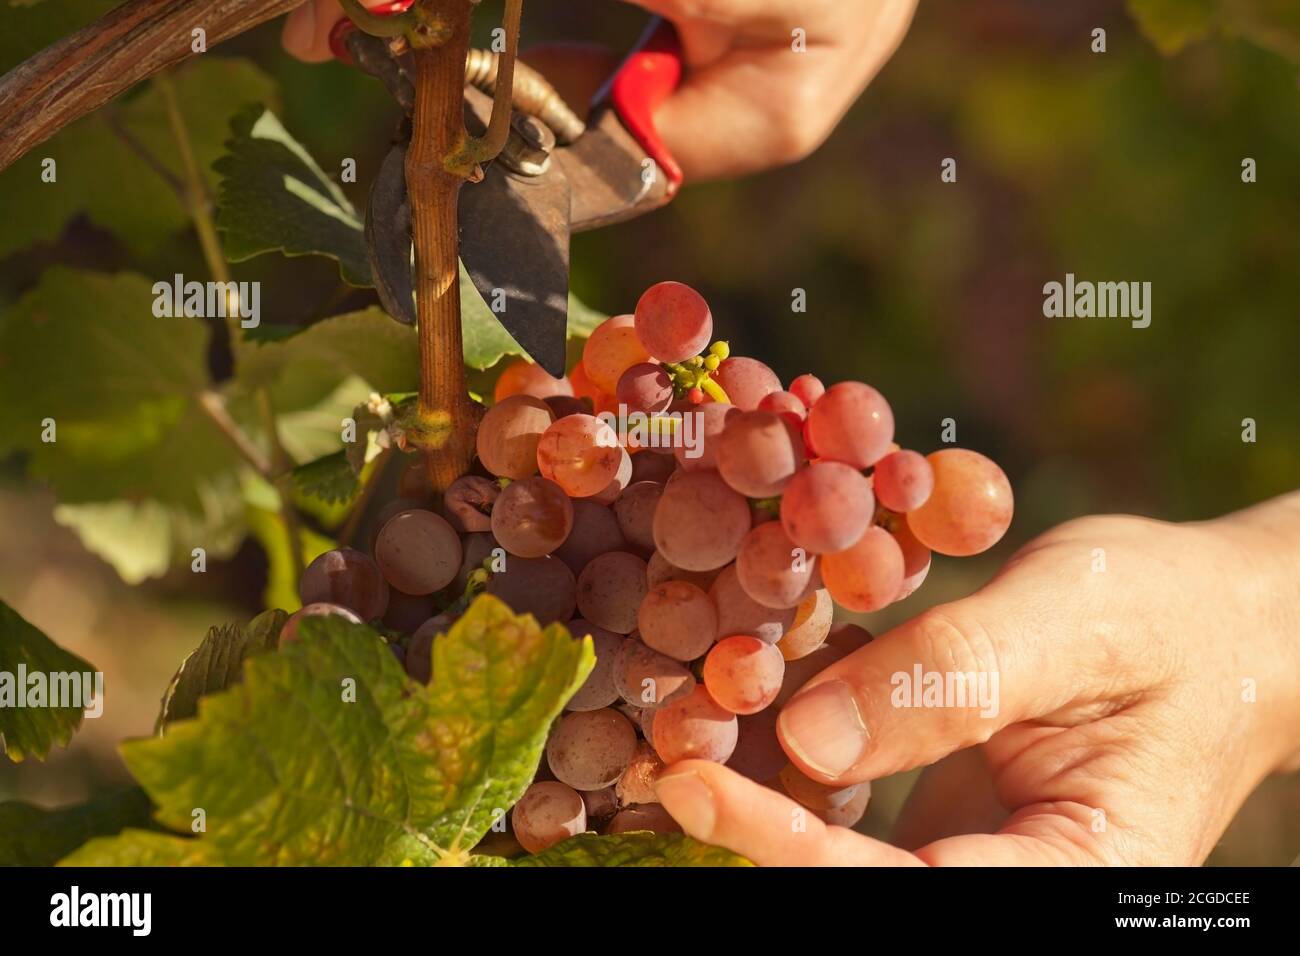 Male hands picking ripe grapes in a vineyard - focus on the grapes Stock Photo